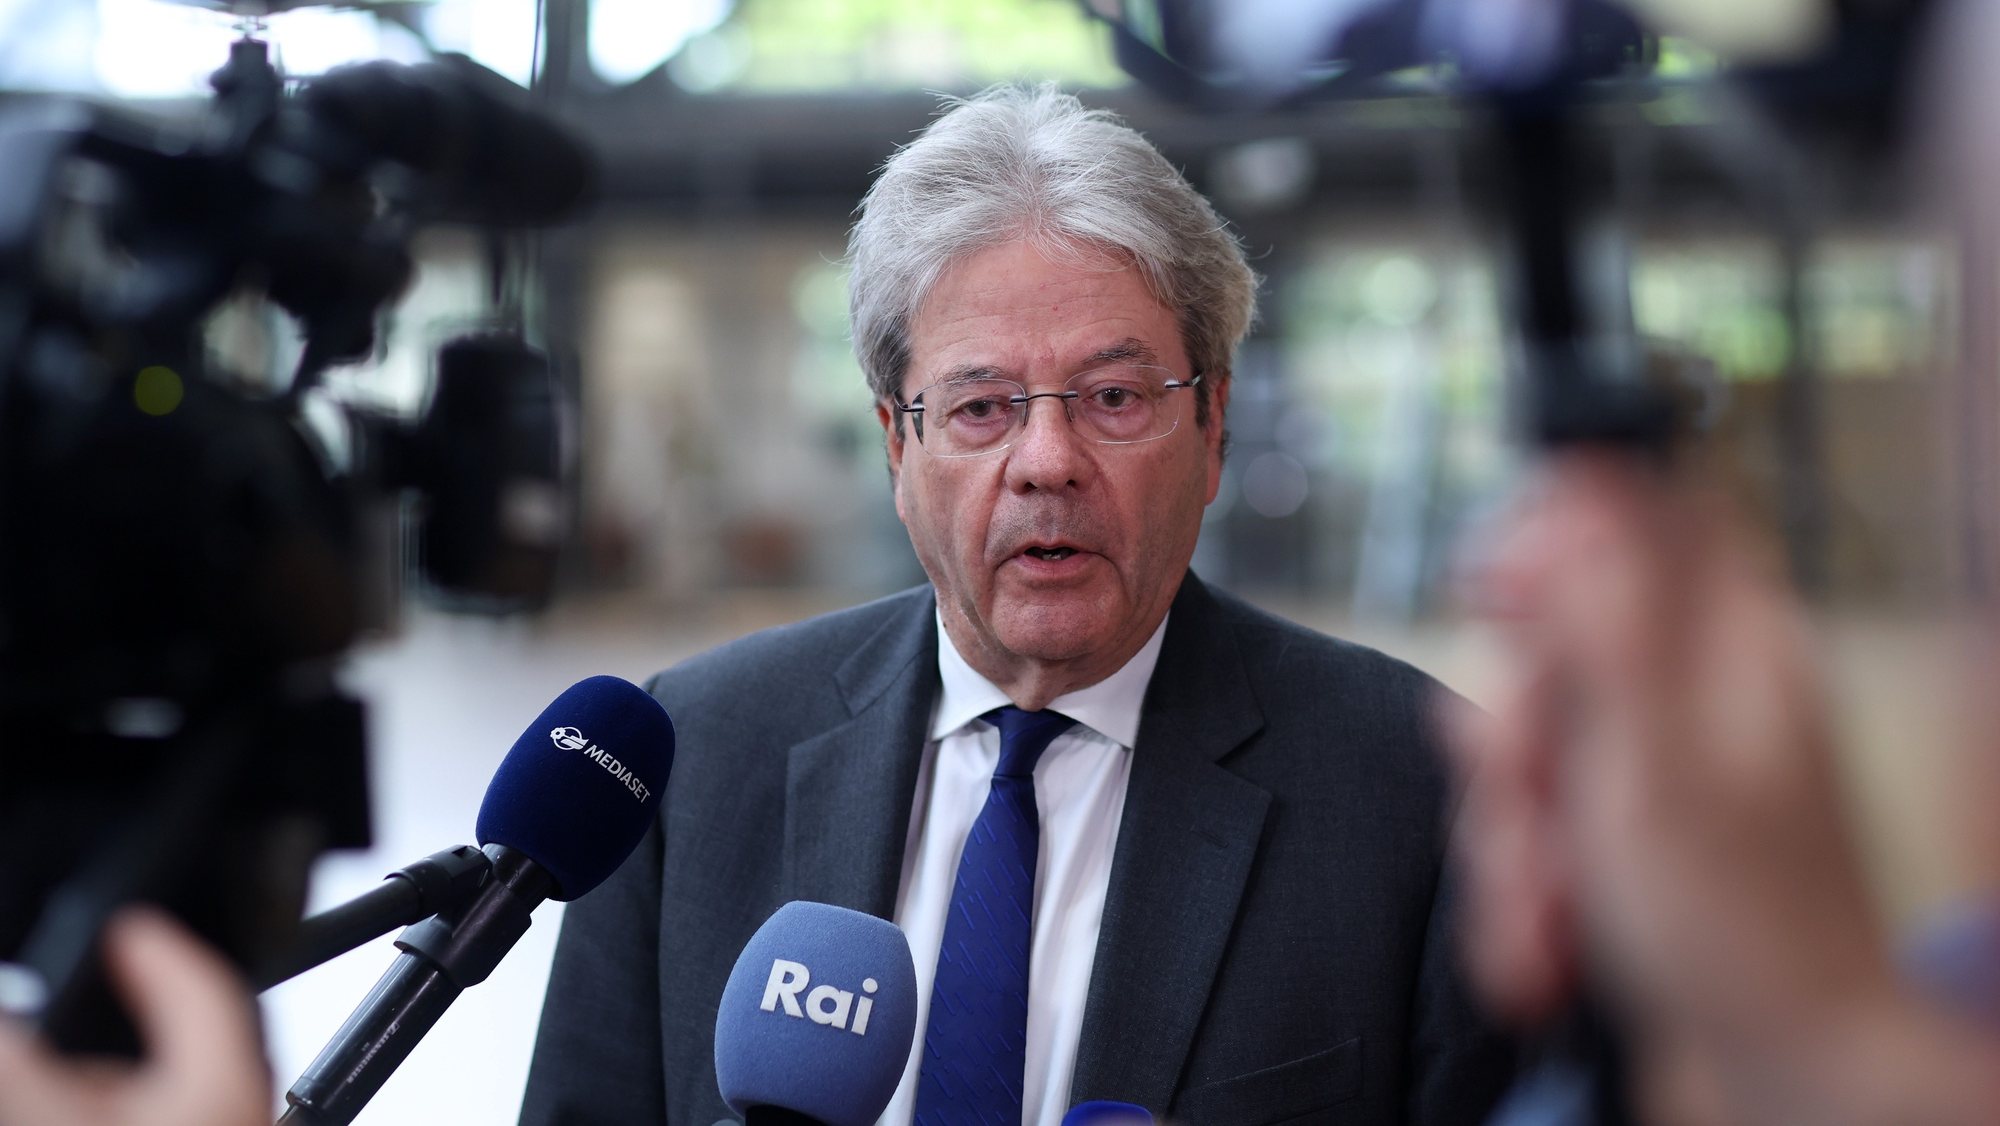 epa11336842 European Commissioner in charge of Economy, Paolo Gentiloni, speaks to the press at the start of a Eurogroup finance ministers meeting in Brussels, Belgium, 13 May 2024. The meeting will include an assessment of the latest macroeconomic developments and outlook, including a briefing on recent international meetings. The Commission is also expected to share its views on recent budgetary developments in the euro area.  EPA/OLIVIER HOSLET